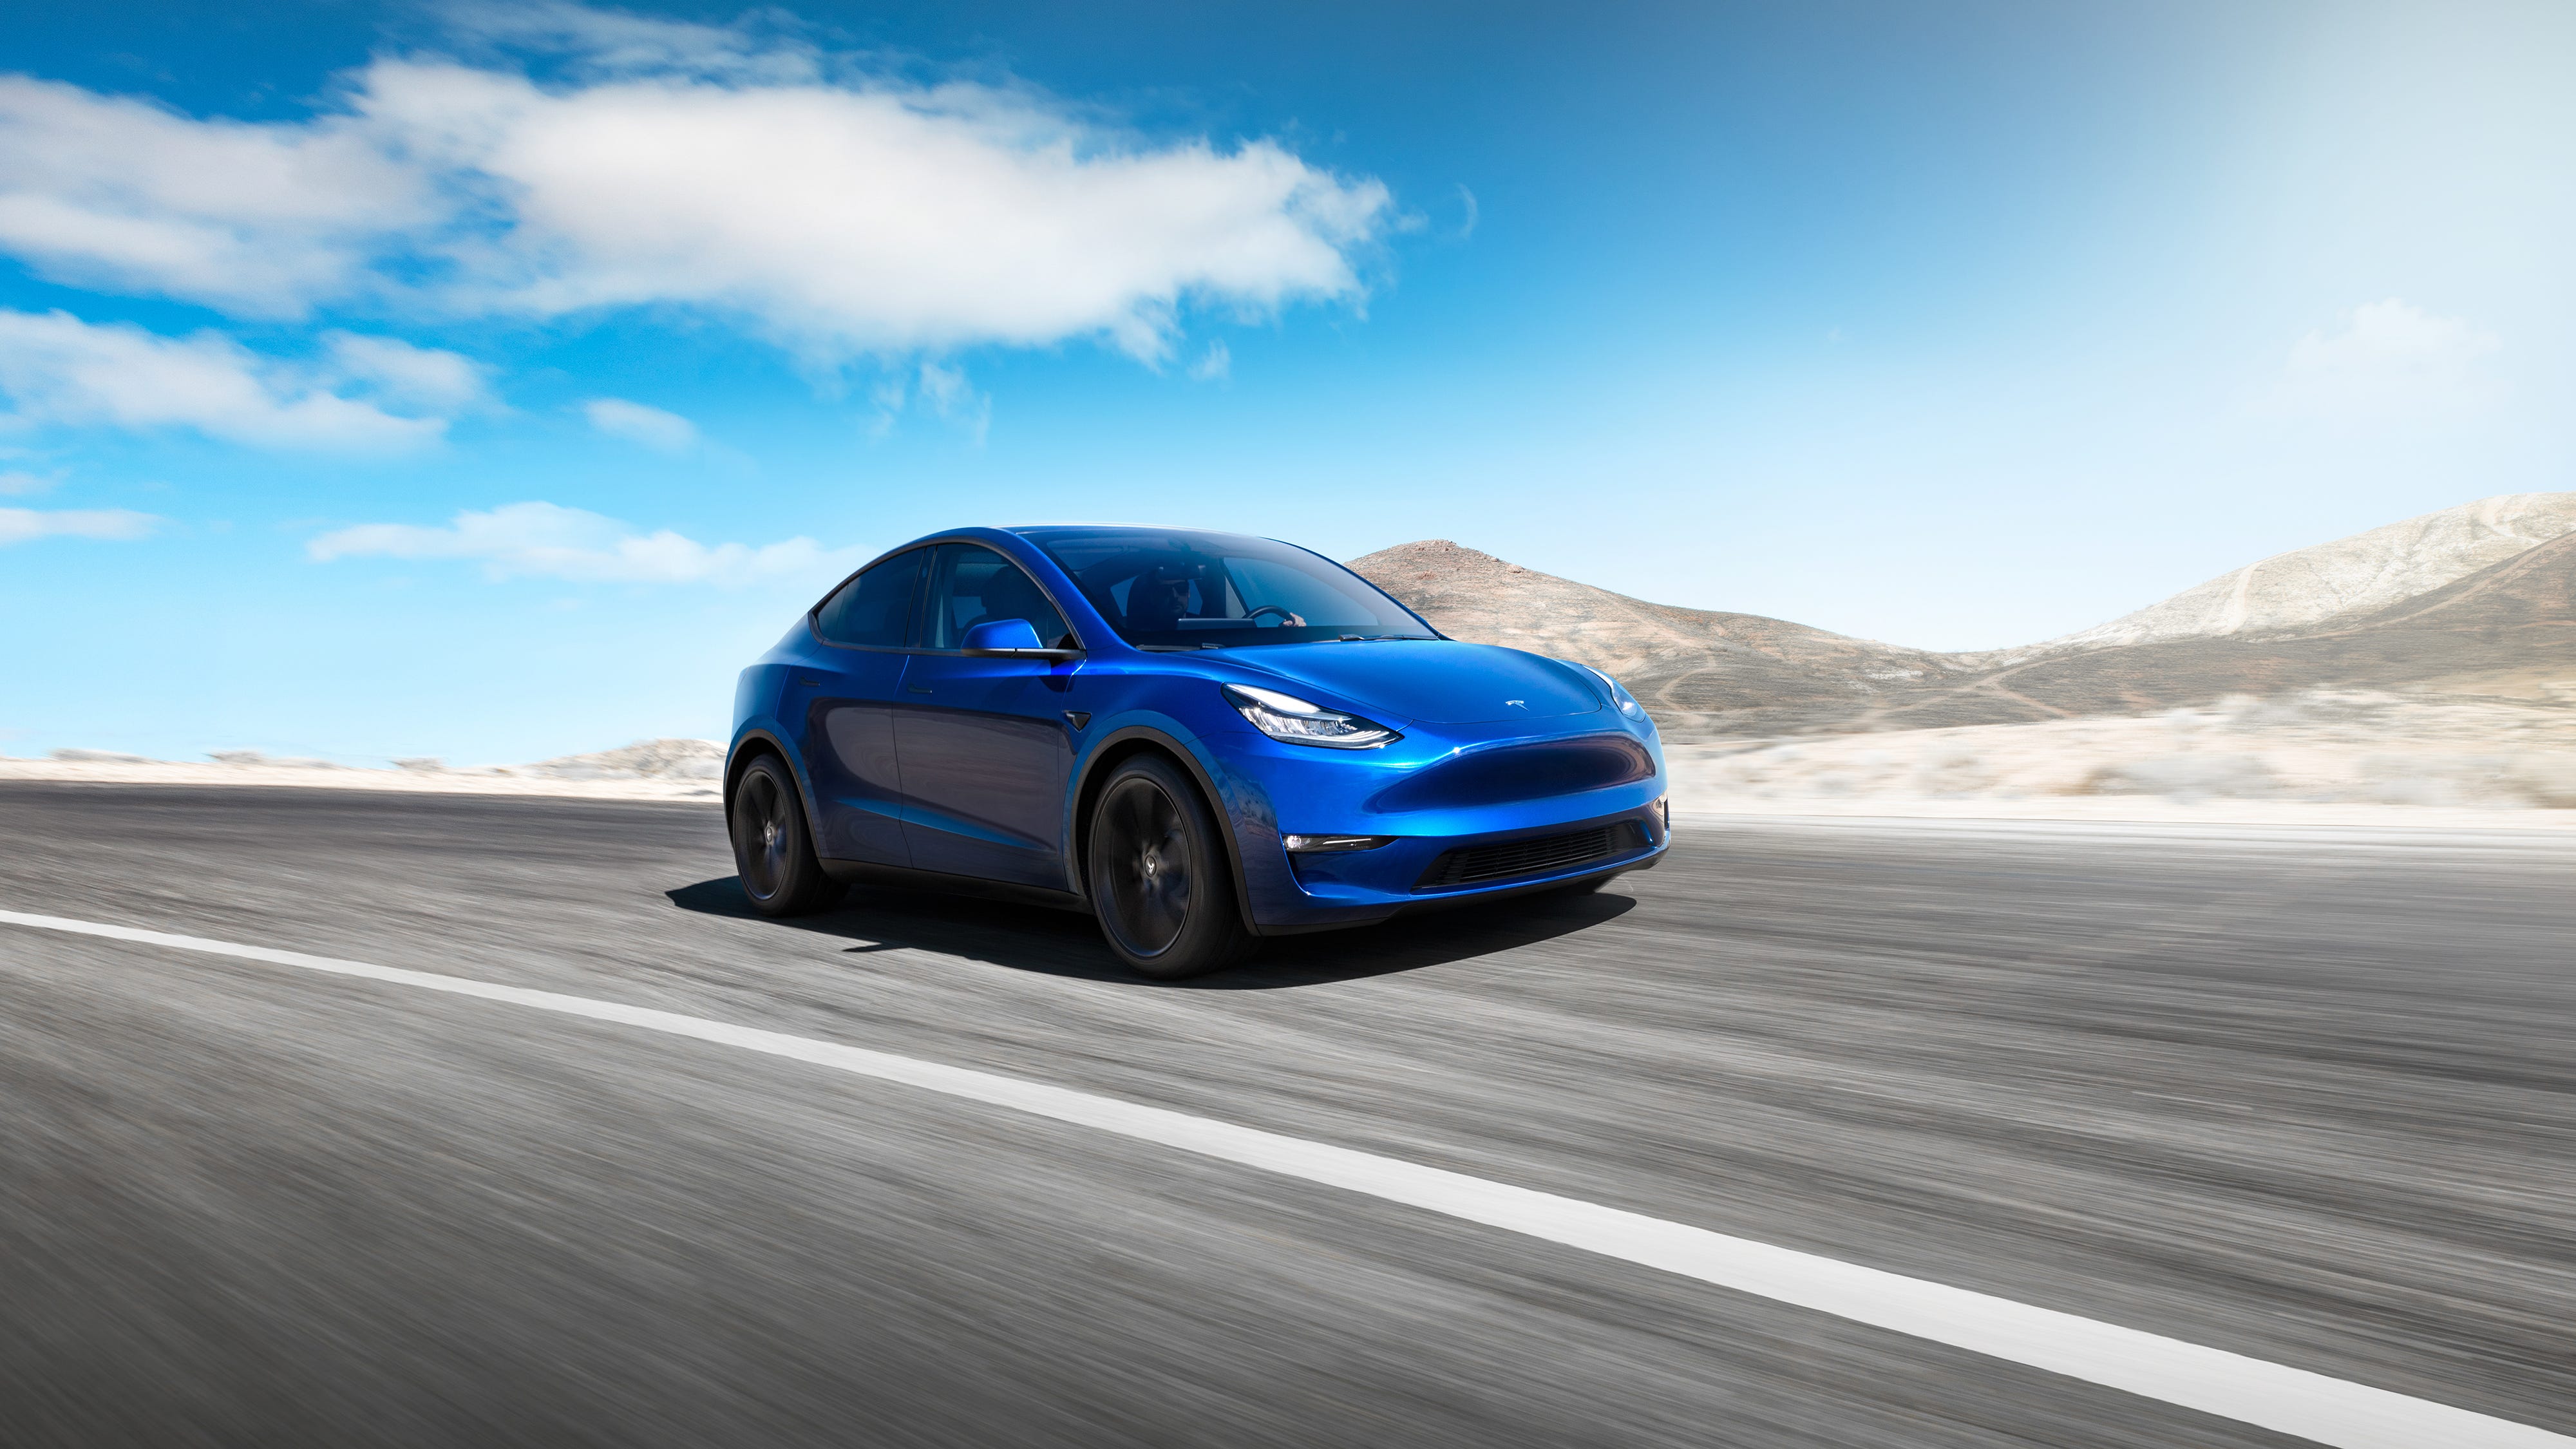 Tesla, which is in the middle of the launch of its Model Y electric crossover, resisted pressure to close its plant.